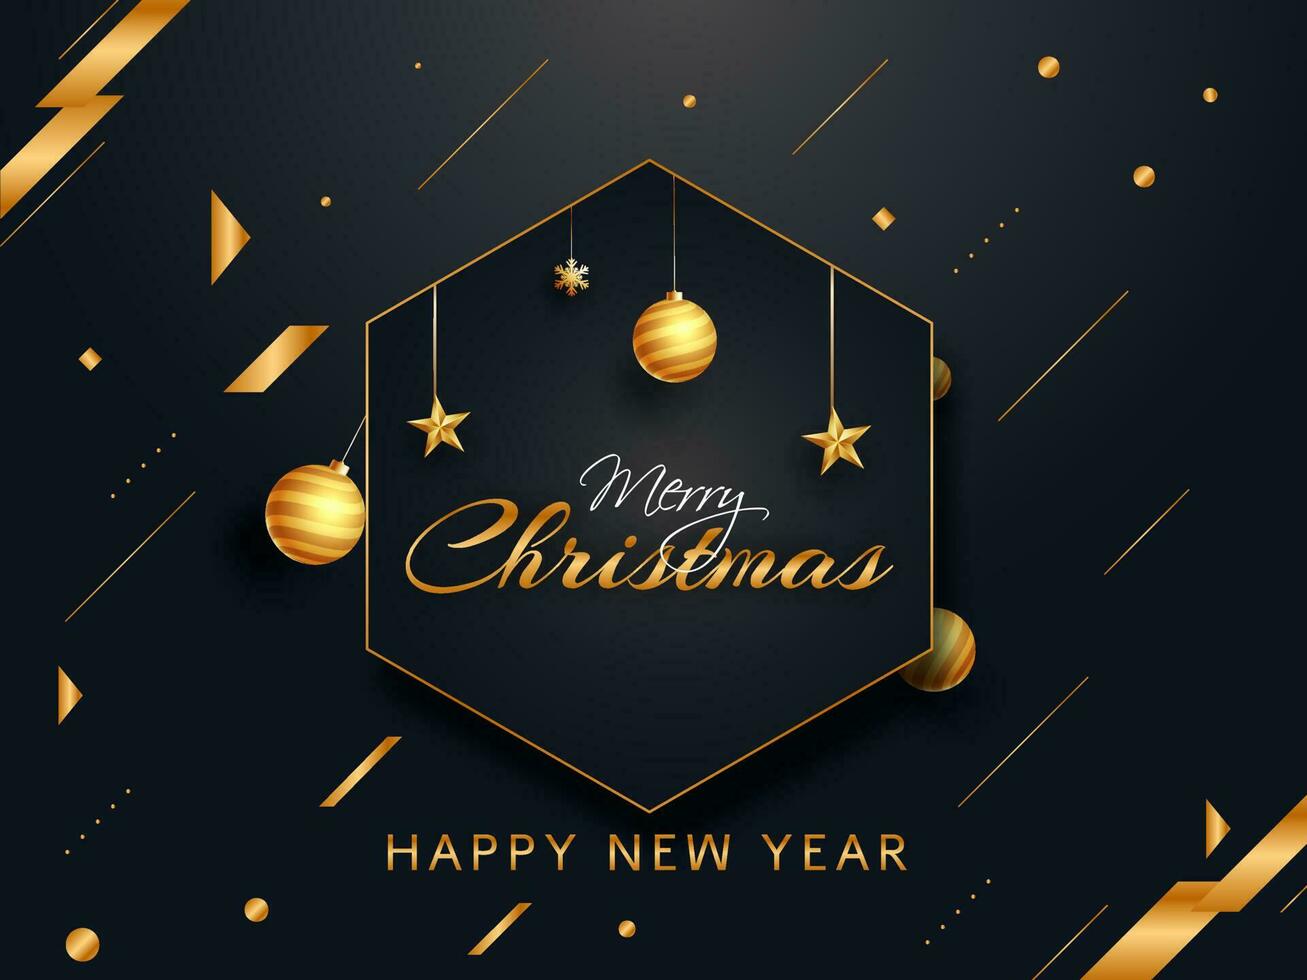 Calligraphy of Merry Christmas with hanging golden baubles, stars and abstract elements decorated on black background for New Year celebration. vector